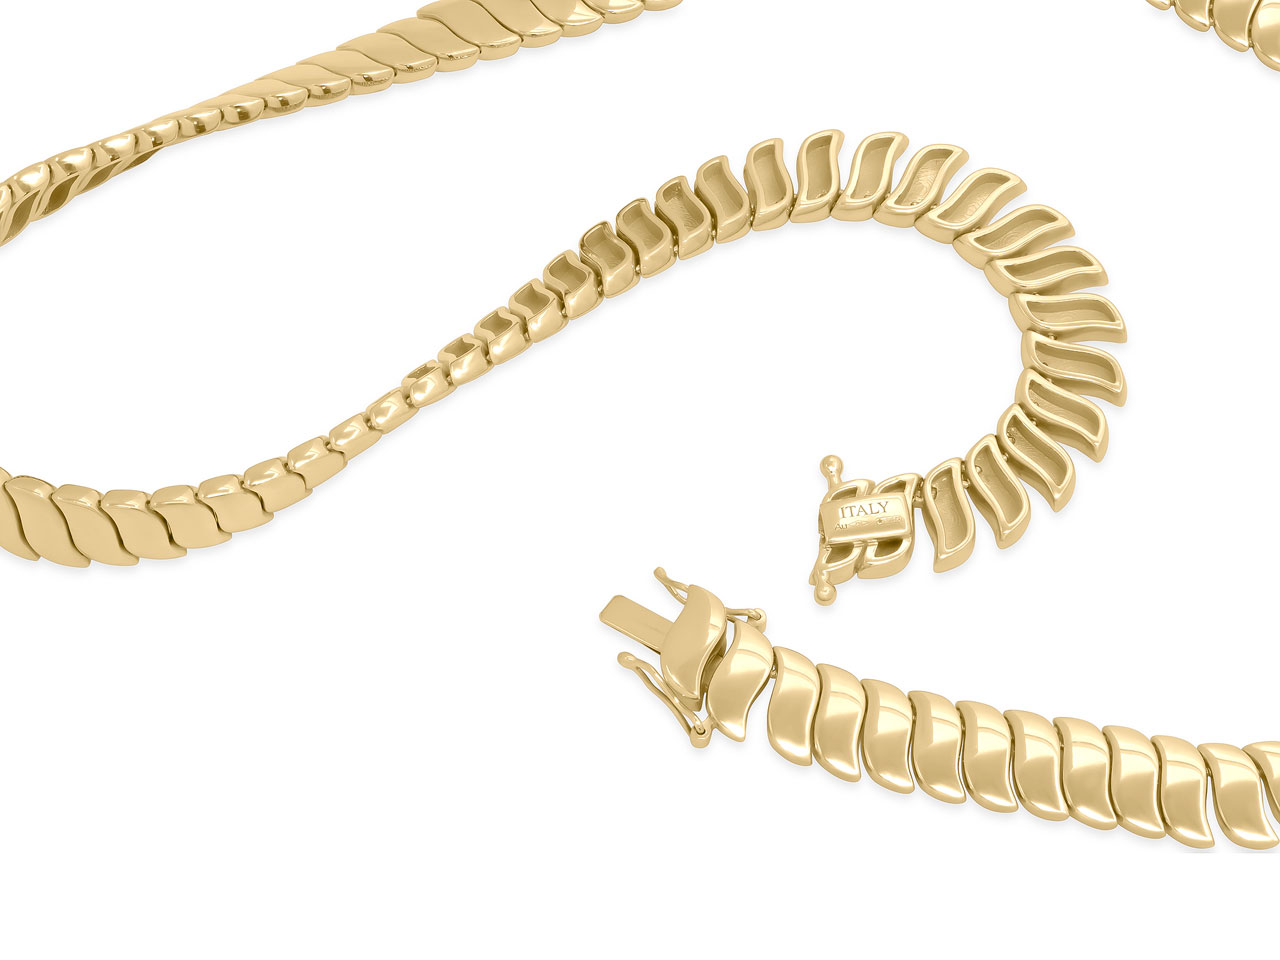 Flexible Link Necklace in 18K Gold, by Beladora